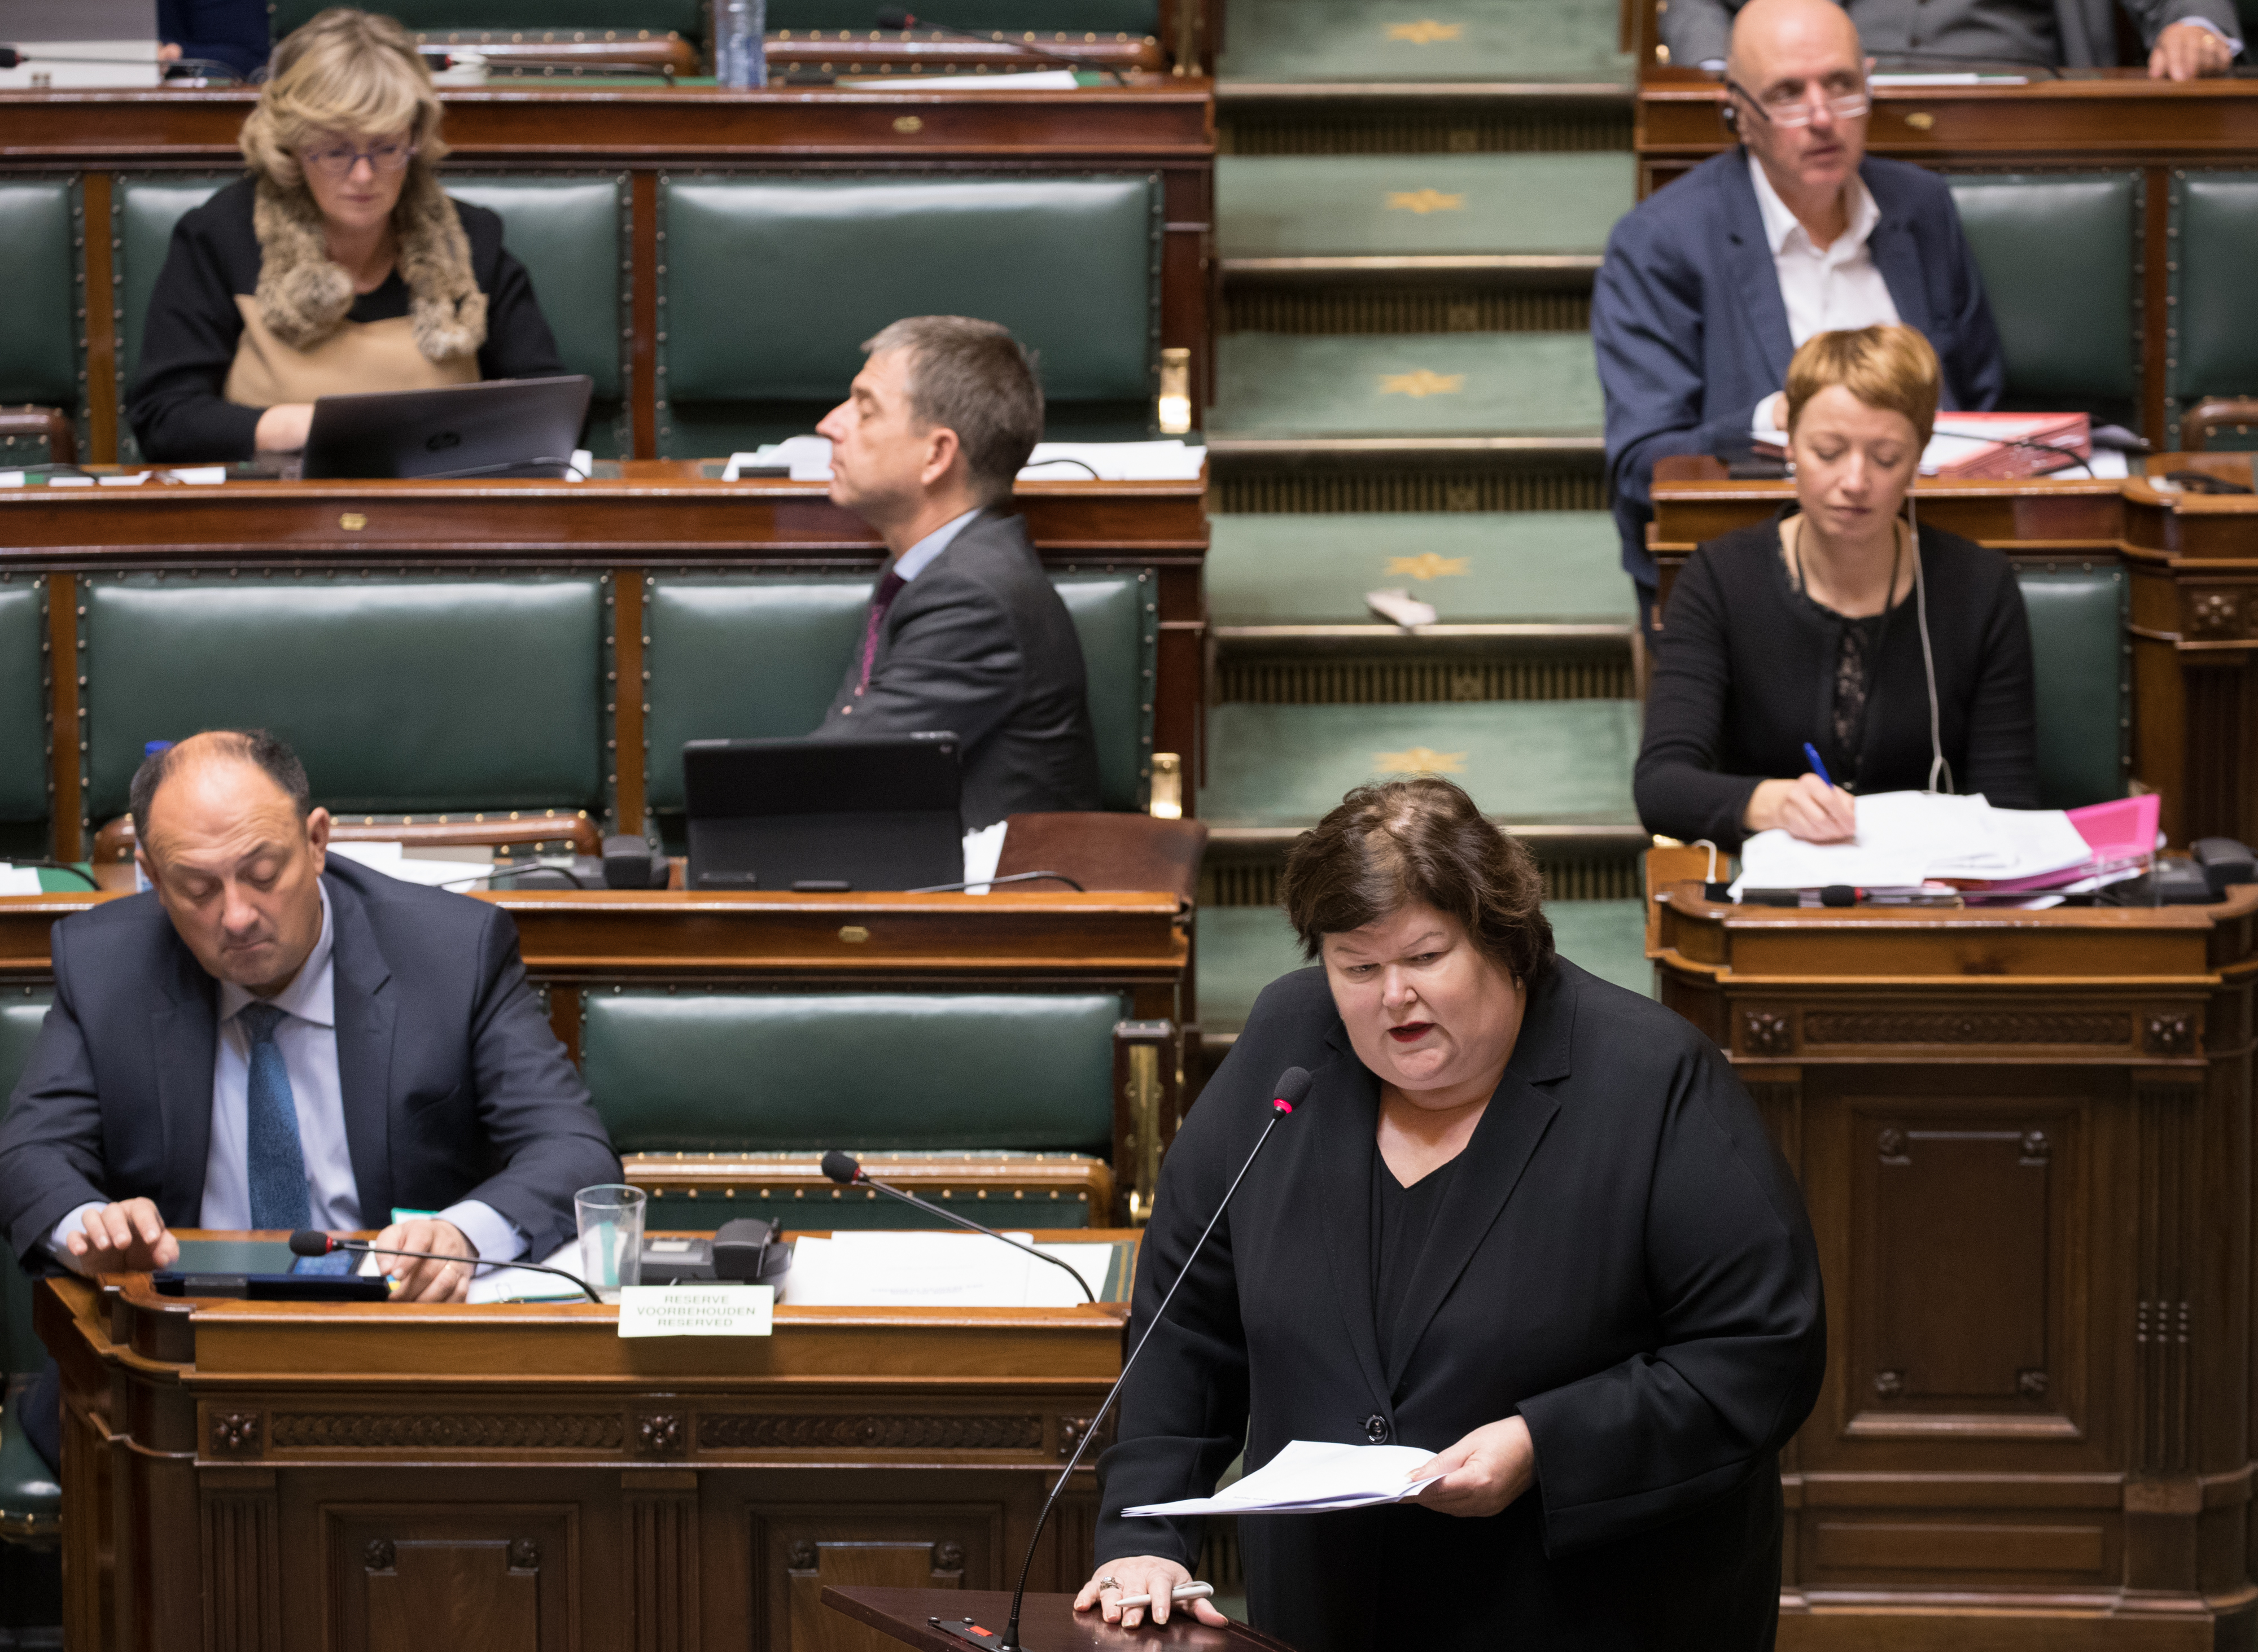 Minister of Health and Social Affairs Maggie De Block delivers a speech at a plenary session of the Chamber at the federal parliament, in Brussels, Thursday 02 February 2017. BELGA PHOTO BENOIT DOPPAGNE